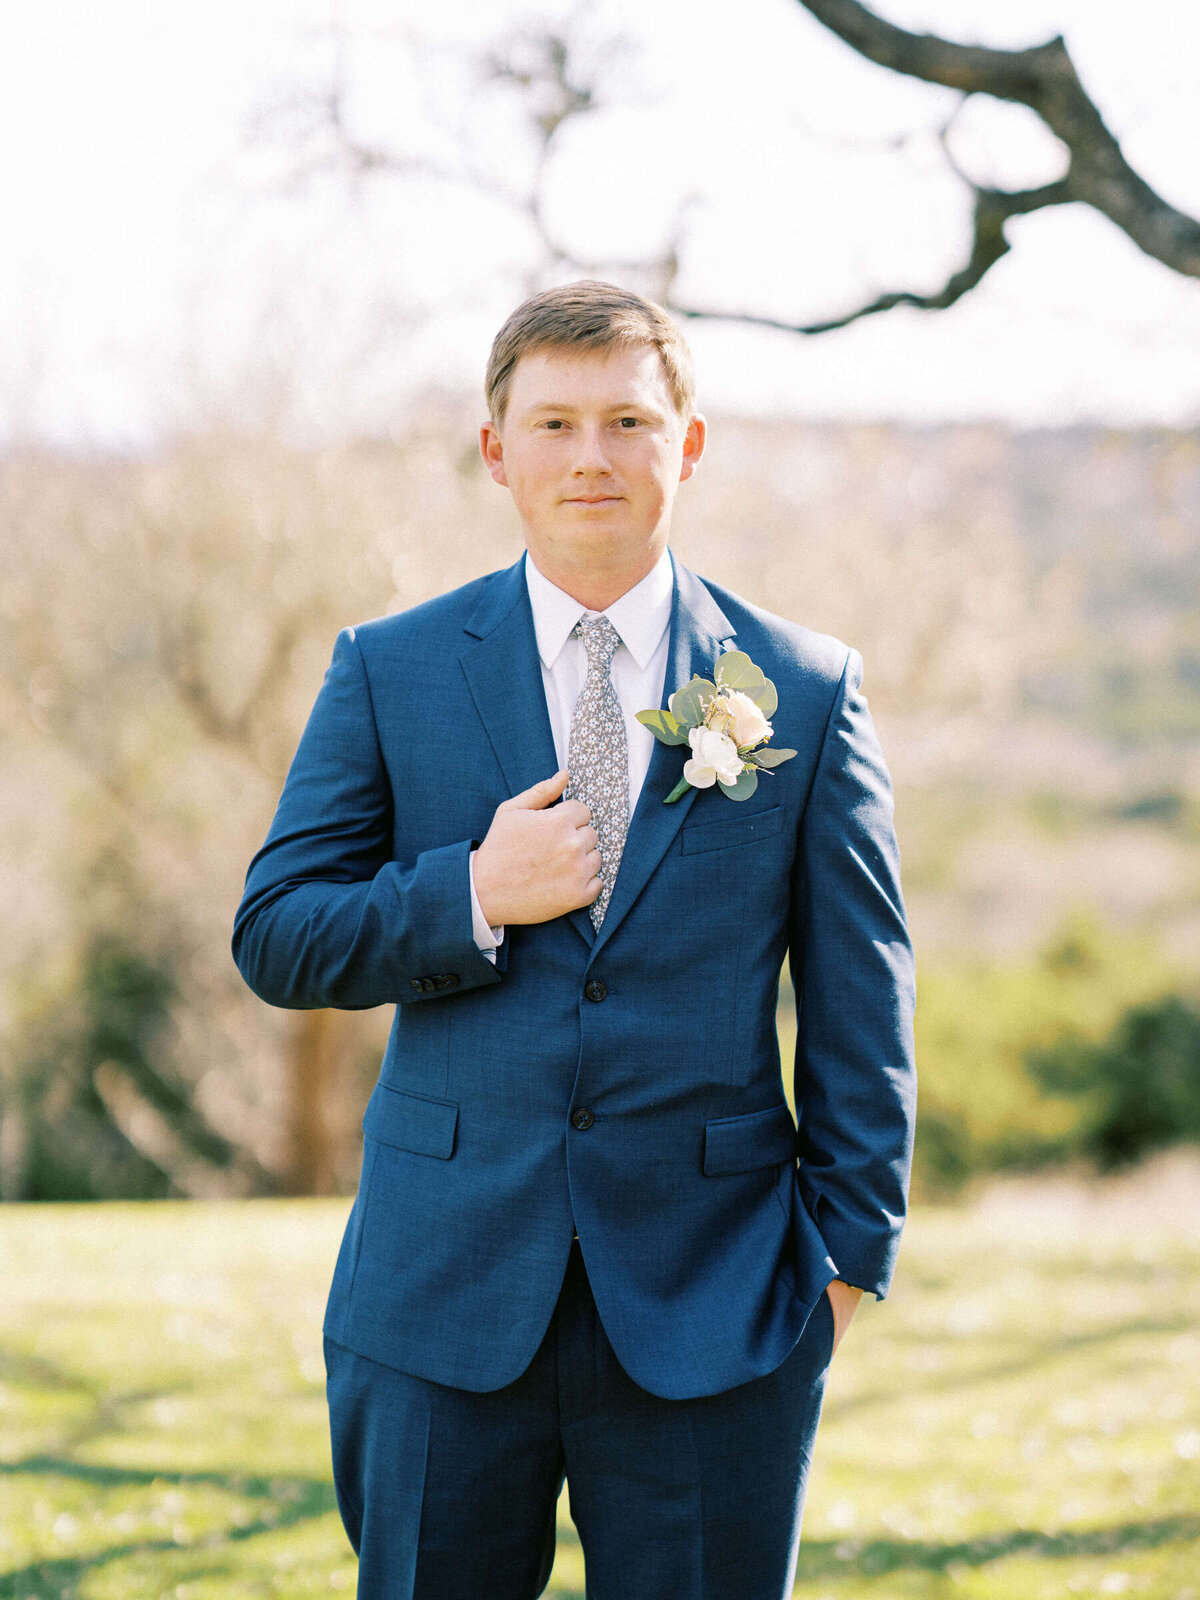 Canyonwood Ridge groom in navy suit with floral tie